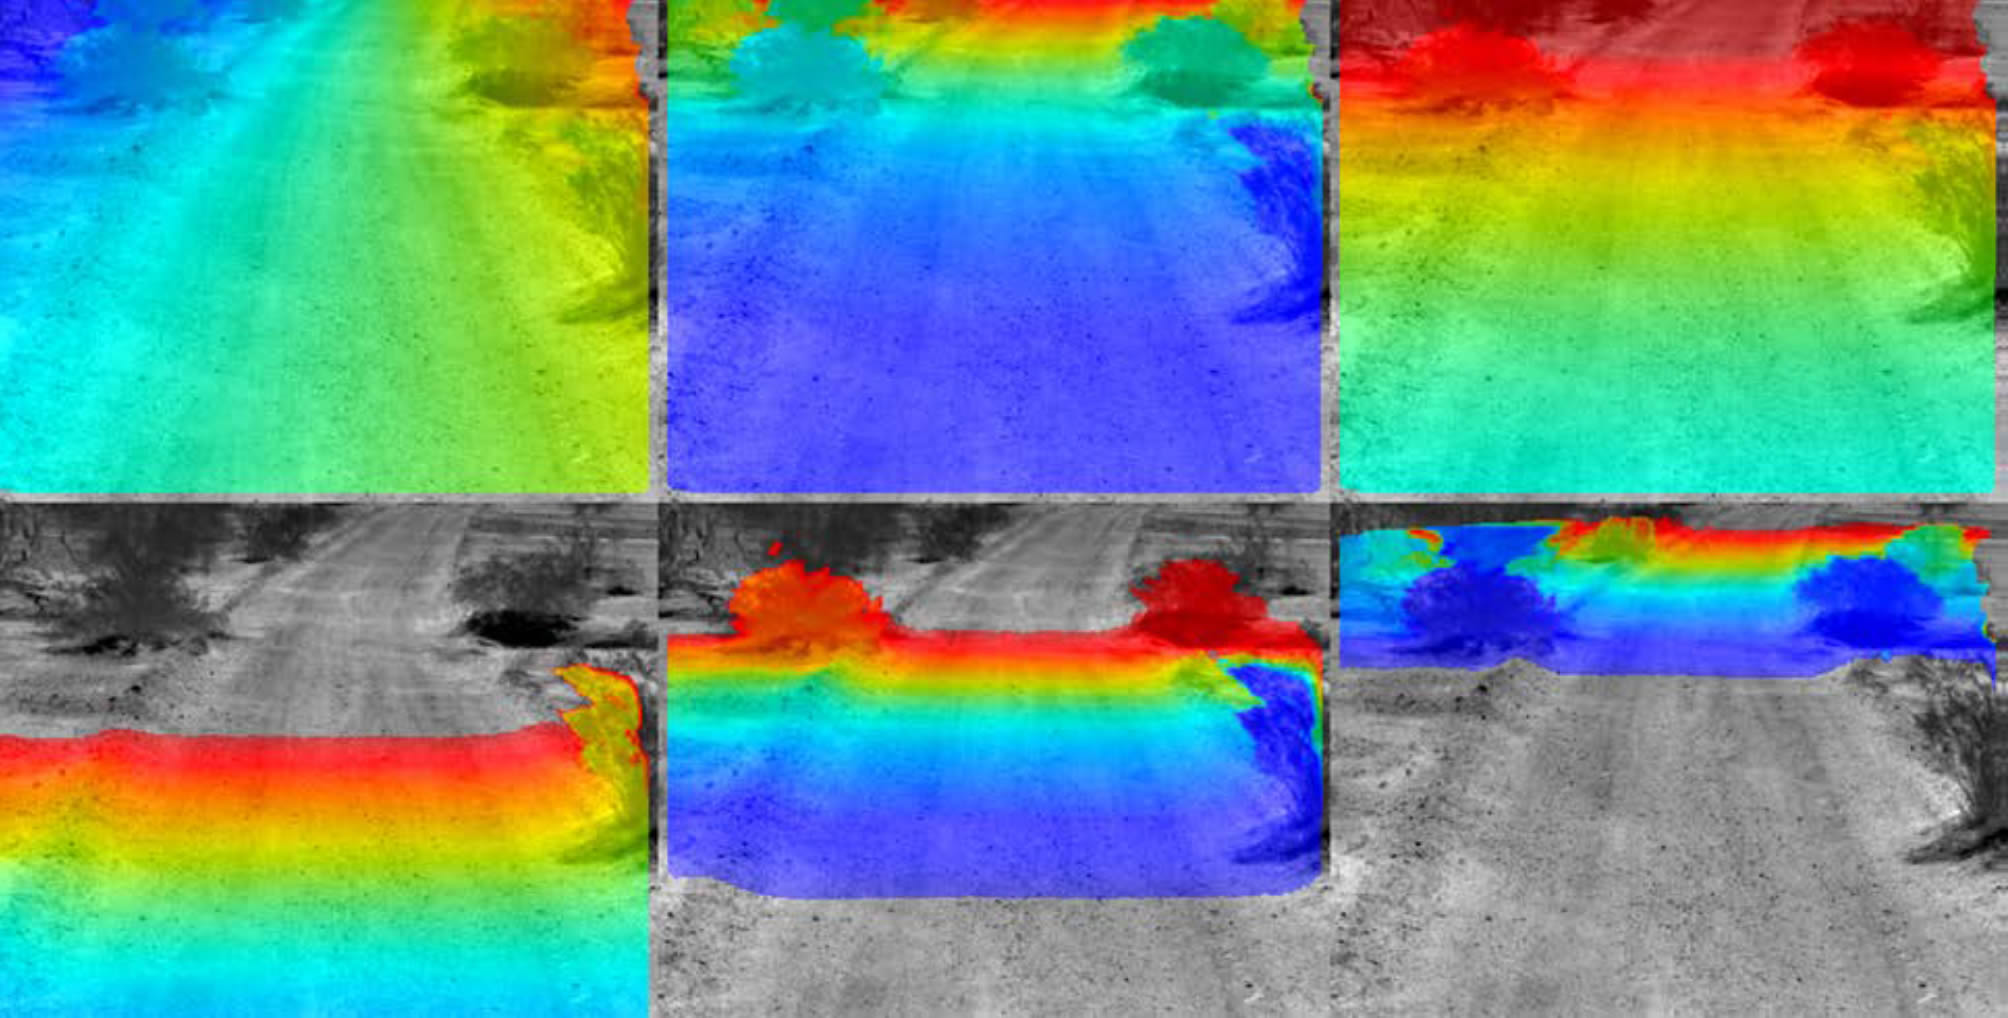 Three dimensional scene reconstruction via infrared camera on a ground vehicle